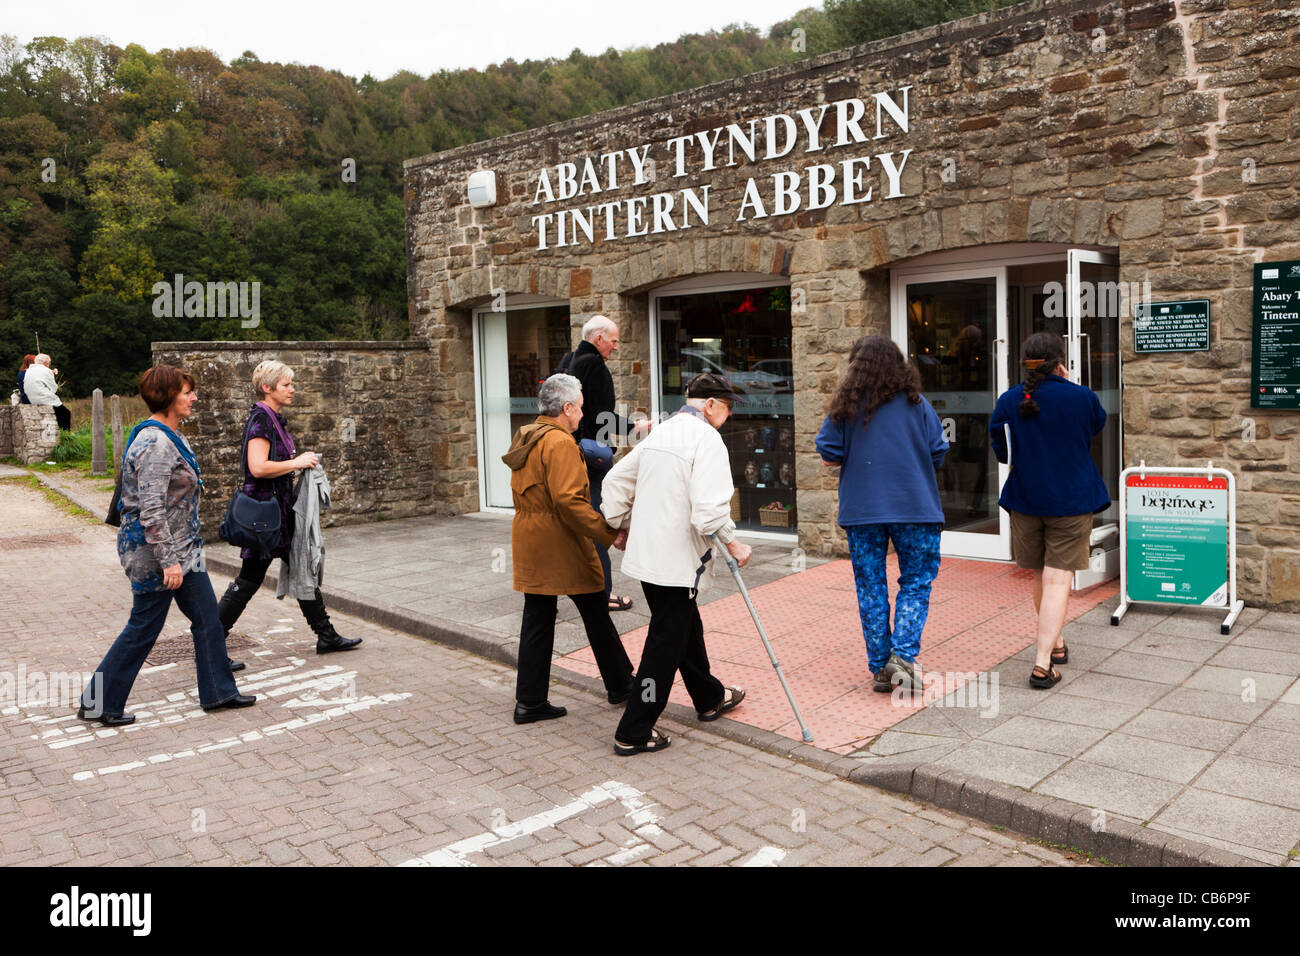 People walking into entrance to Tintern Abbey CADW property Wales UK Stock Photo